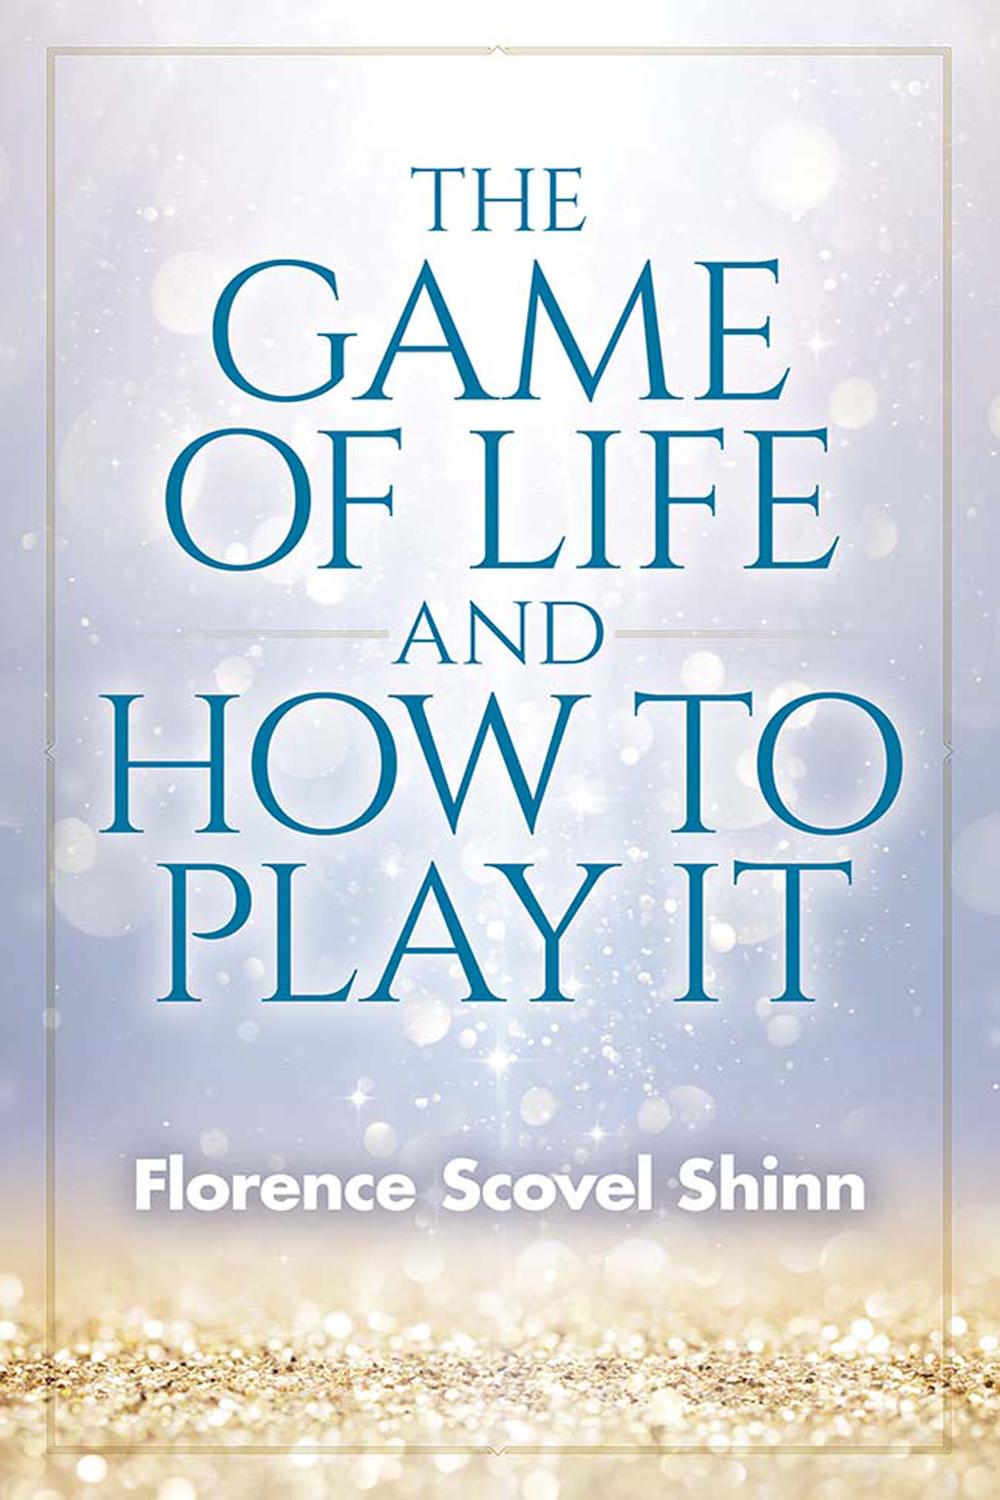 The Game of Life and How to Play It - Florence Scovel Shinn,,